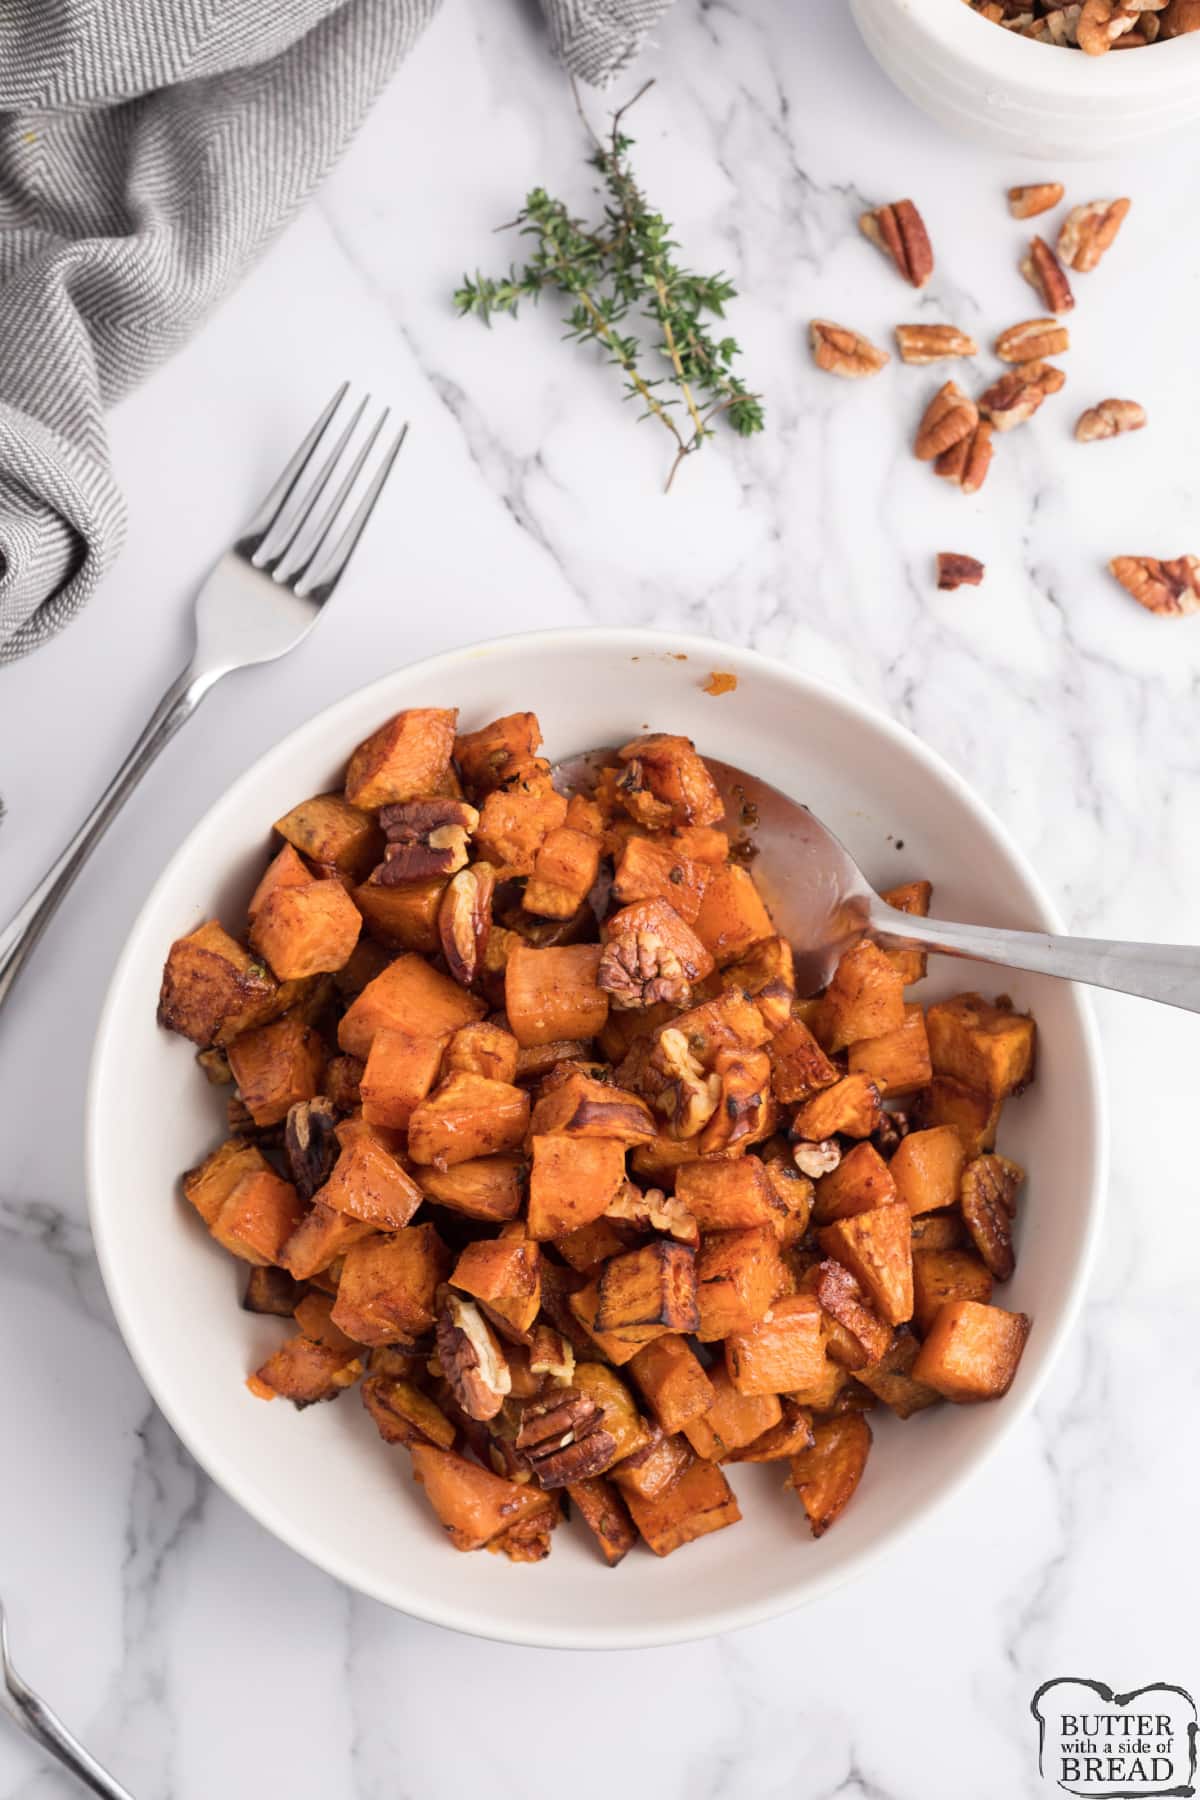 Sweet potatoes roasted in butter, cinnamon and brown sugar